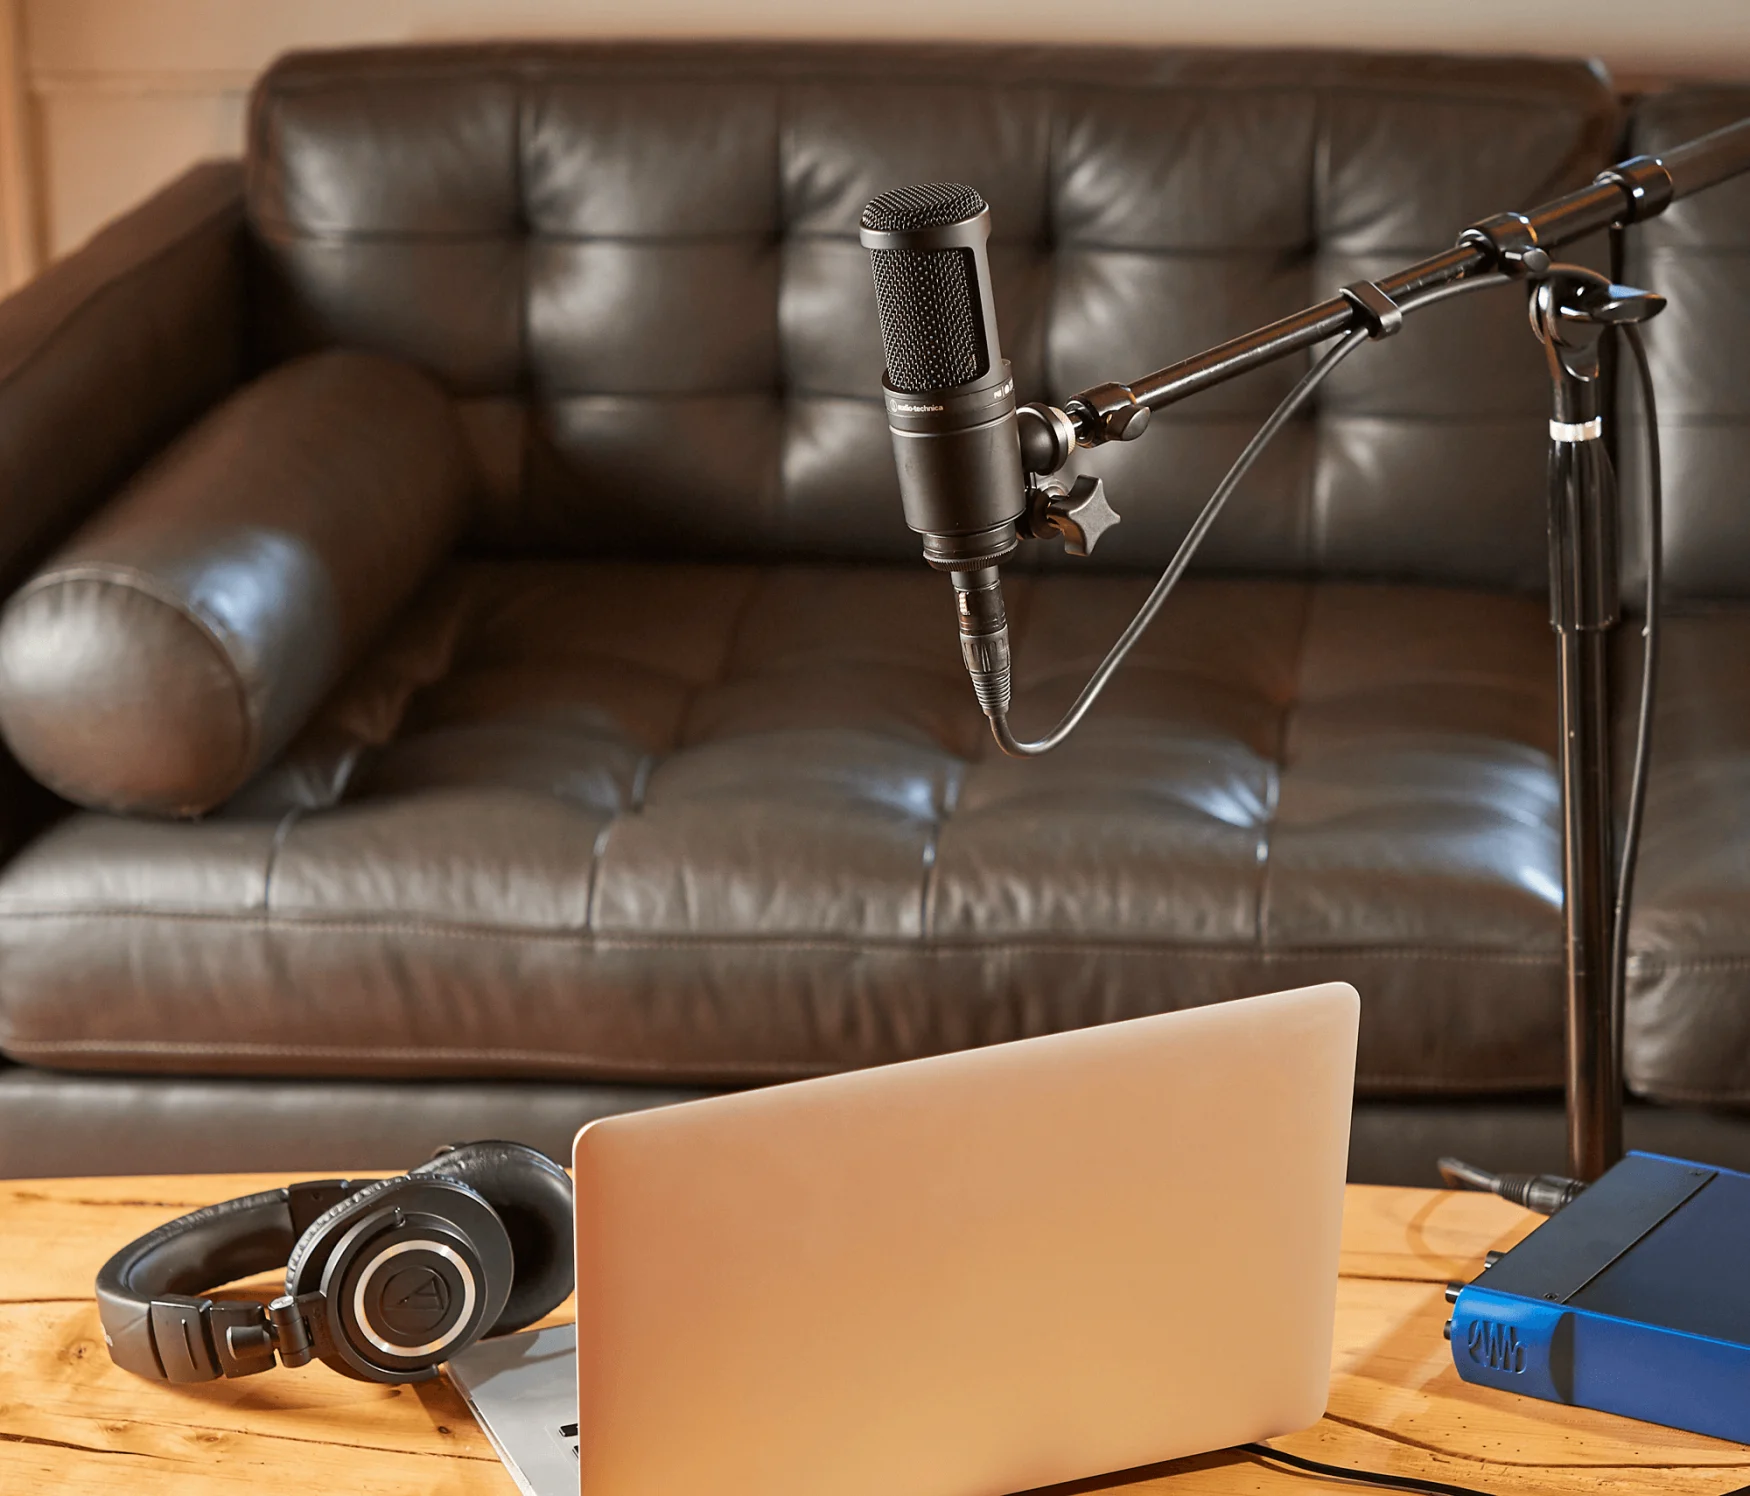 An Audio-Technica AT2020 condenser mic is on a stand above a coffee table with a laptop, with a leather couch in the background.